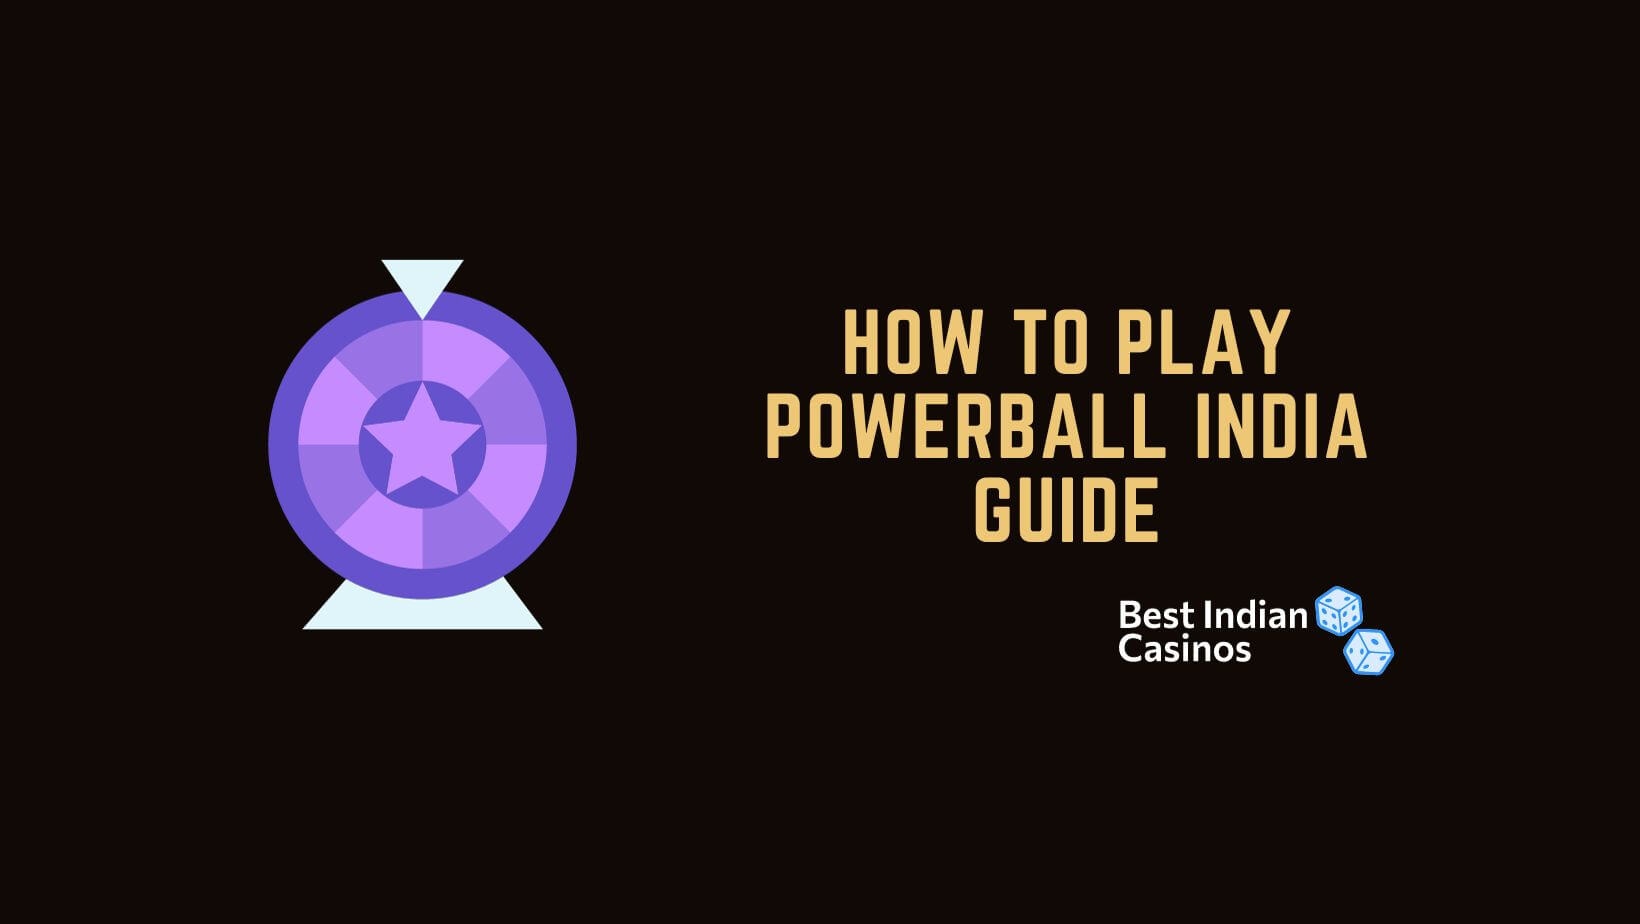 How to Play Powerball India Guide